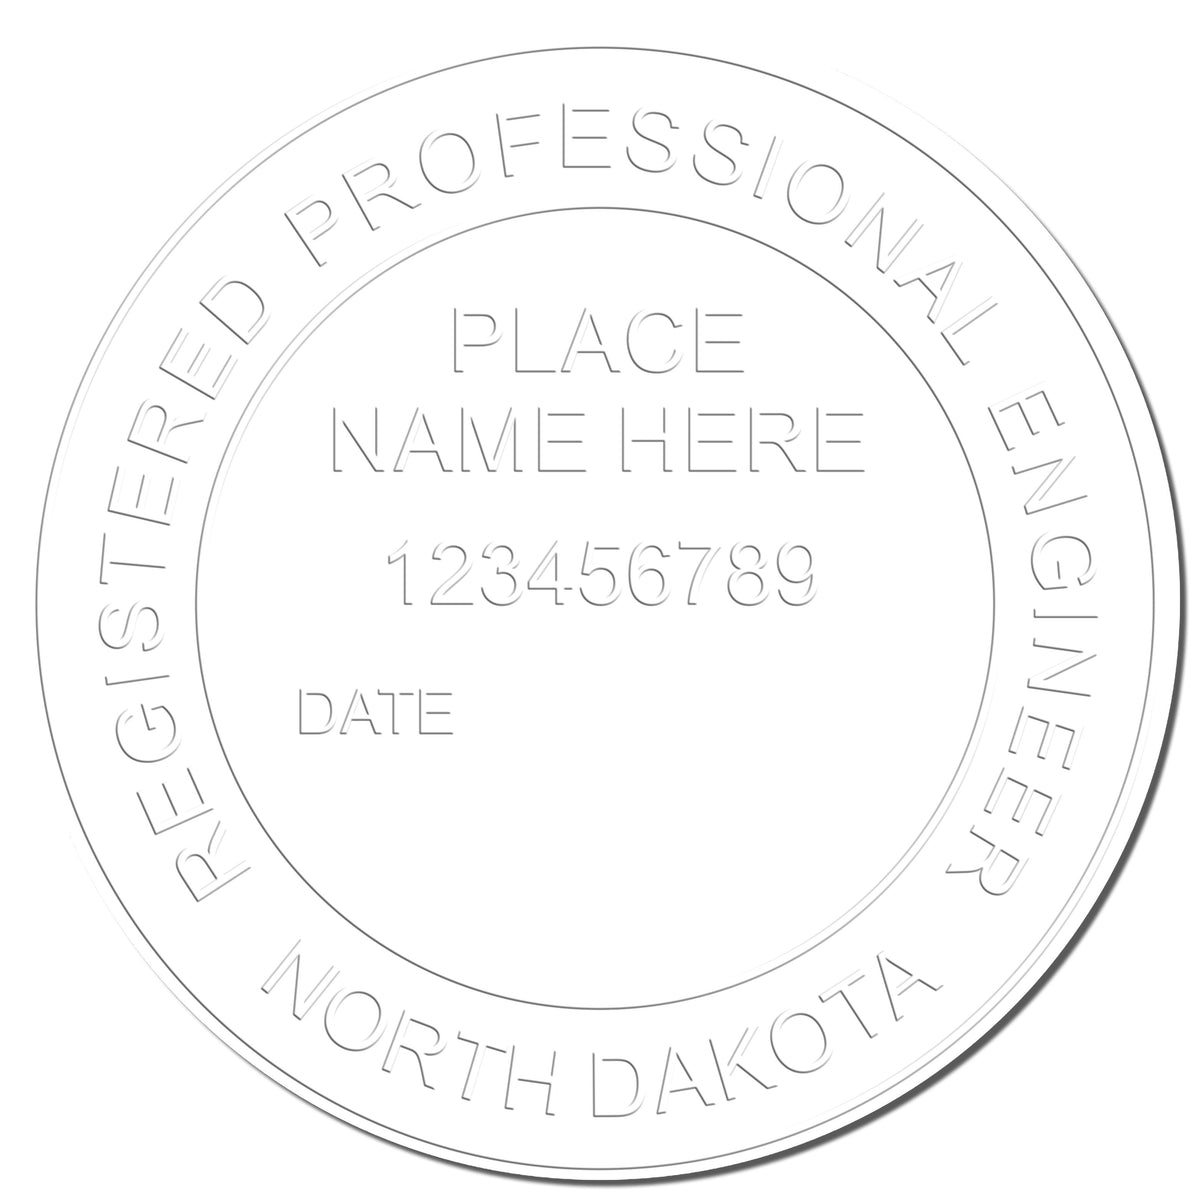 This paper is stamped with a sample imprint of the Hybrid North Dakota Engineer Seal, signifying its quality and reliability.